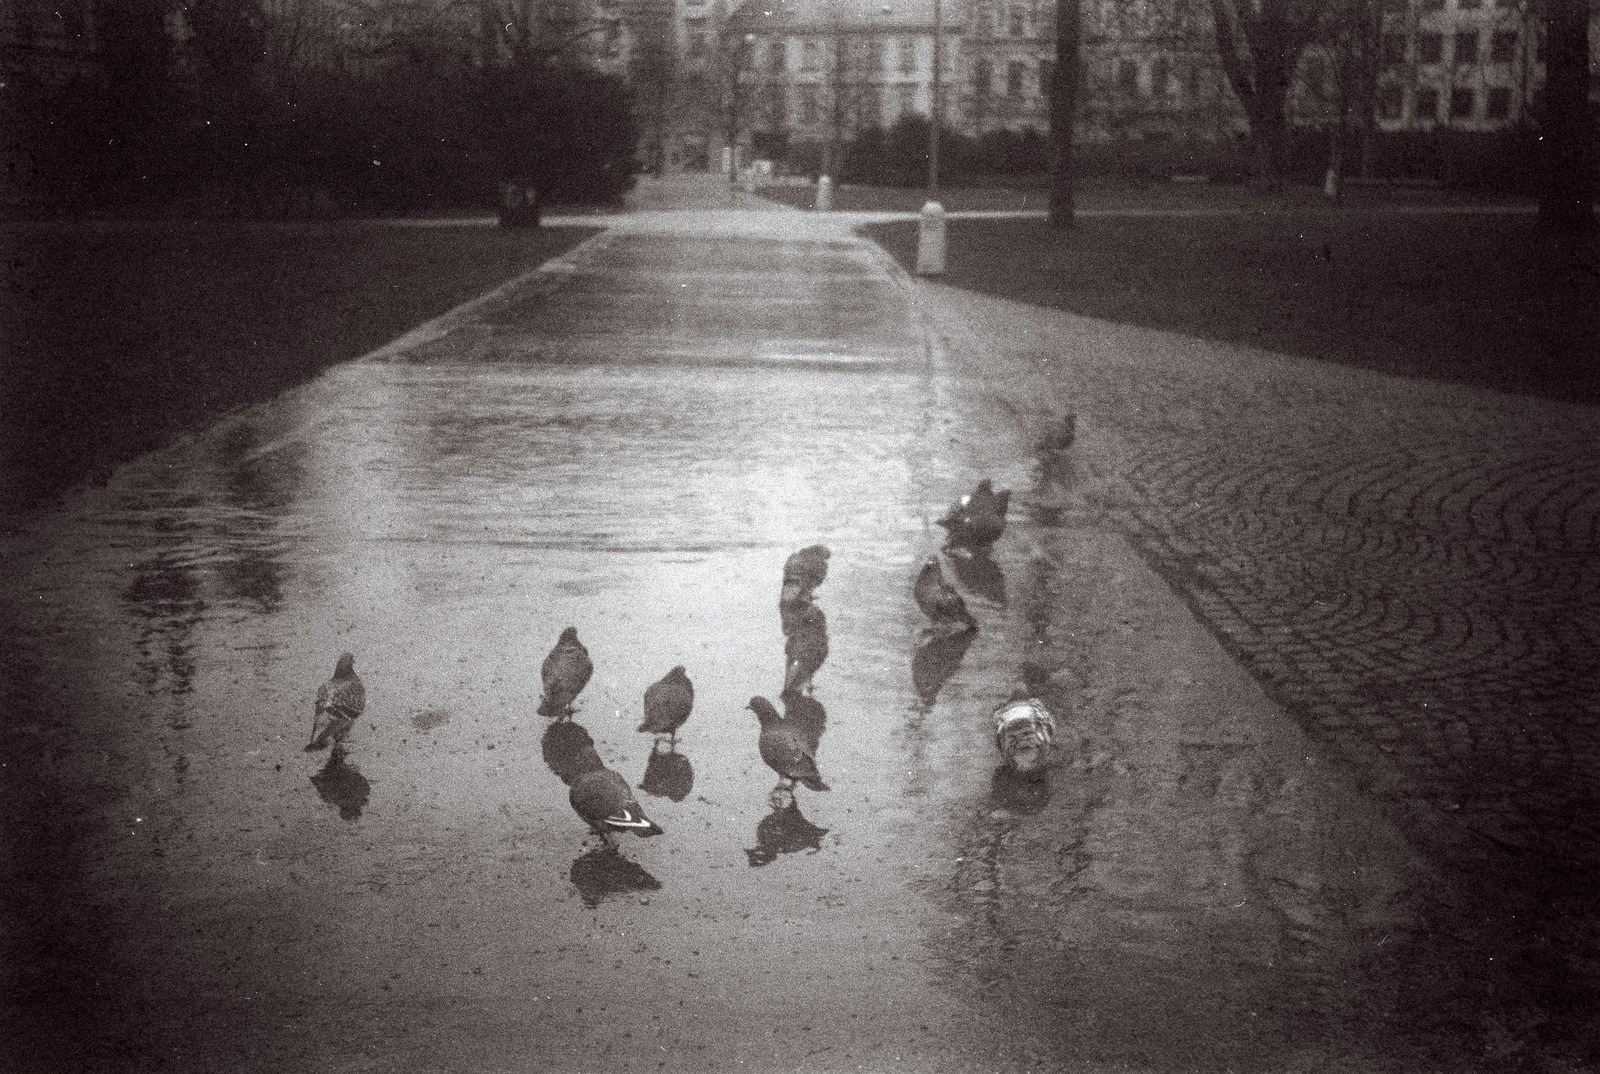 Agfa Billy Record 7.7 - Pigeons